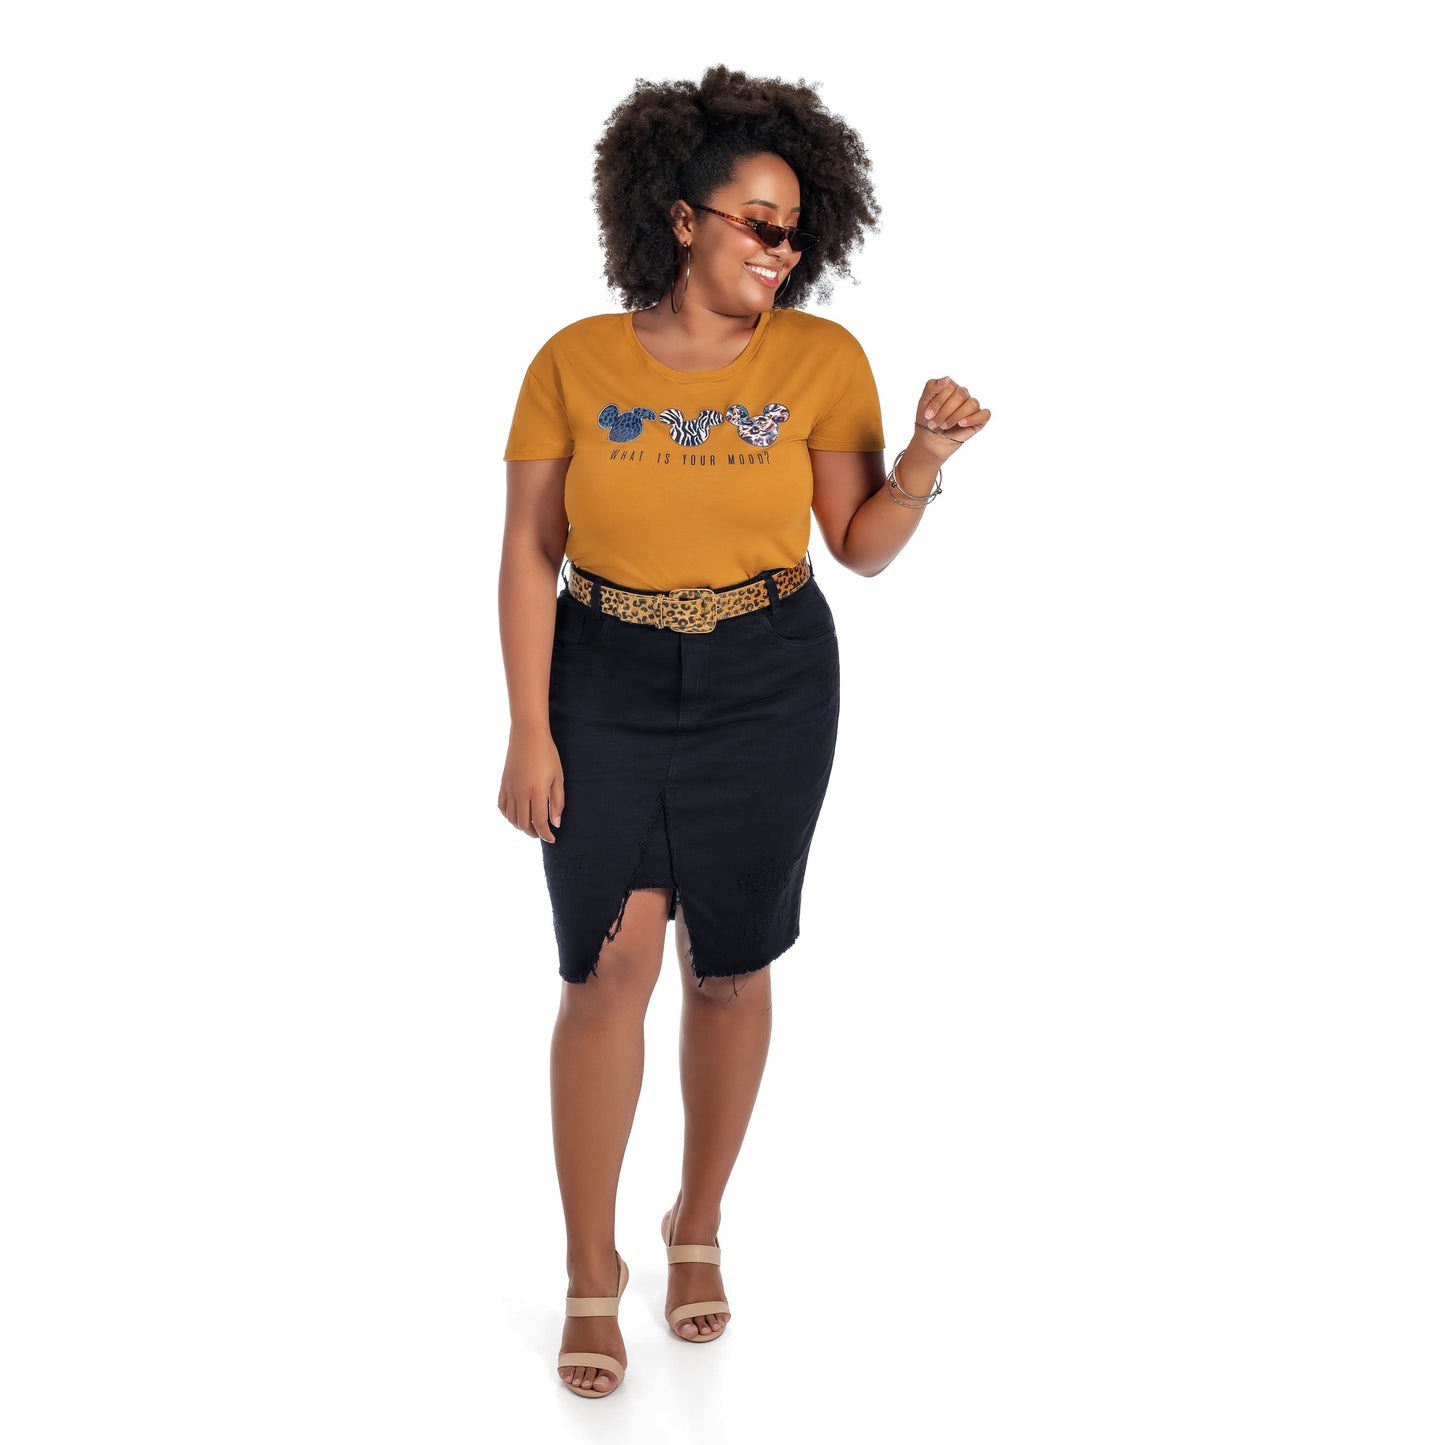 Blusa Mickey What Is Your Mood - Moda Plus Size